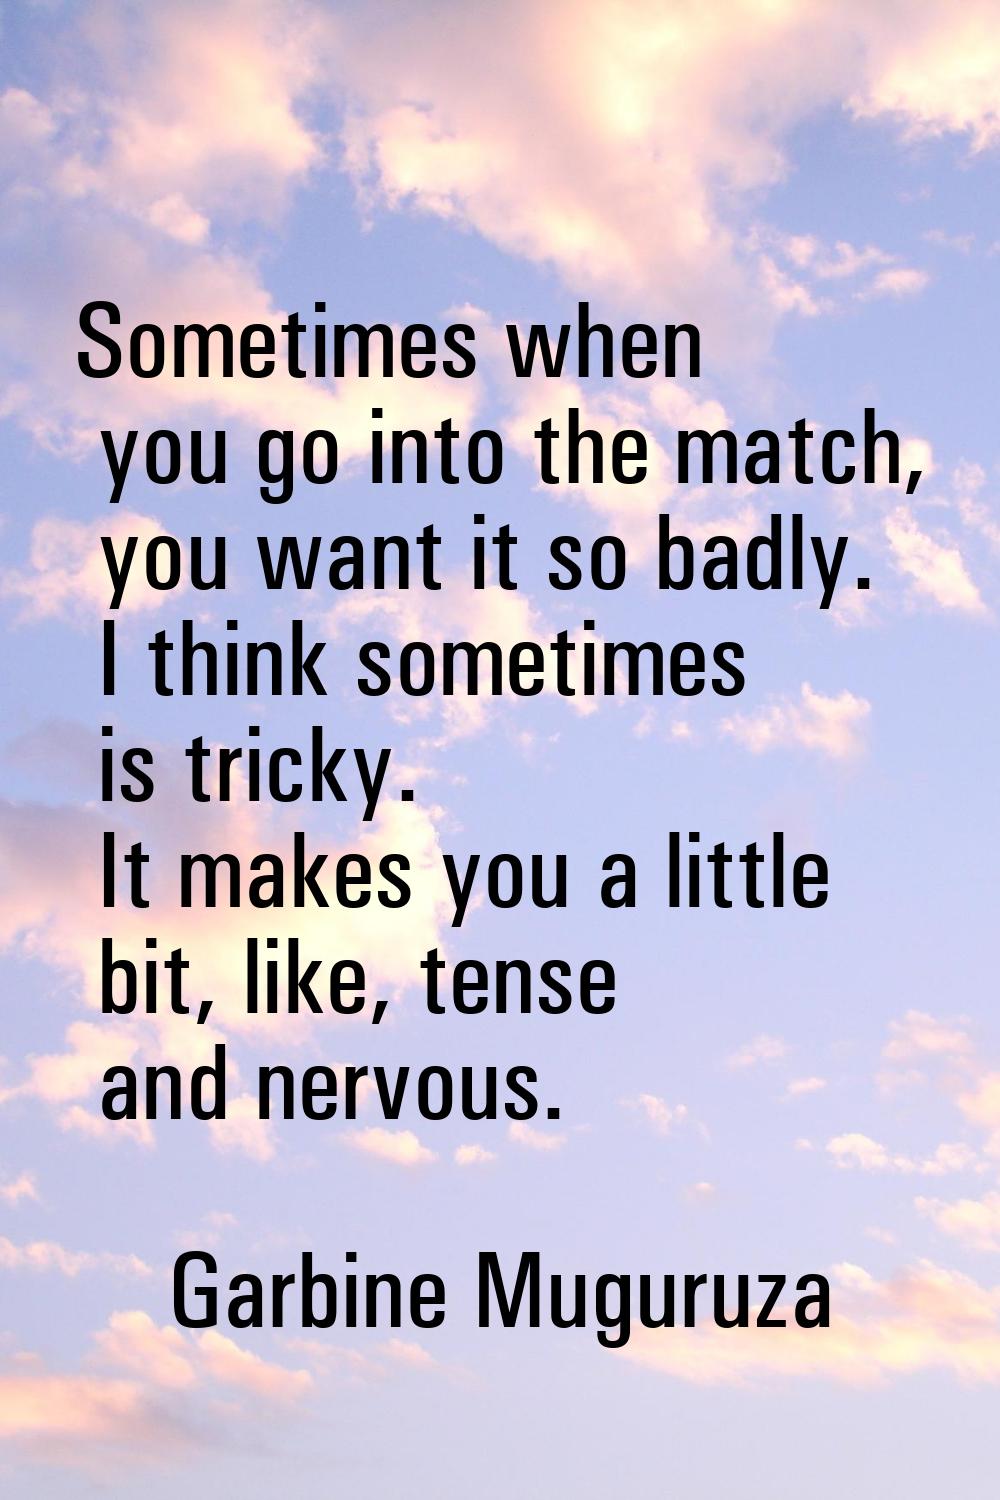 Sometimes when you go into the match, you want it so badly. I think sometimes is tricky. It makes y